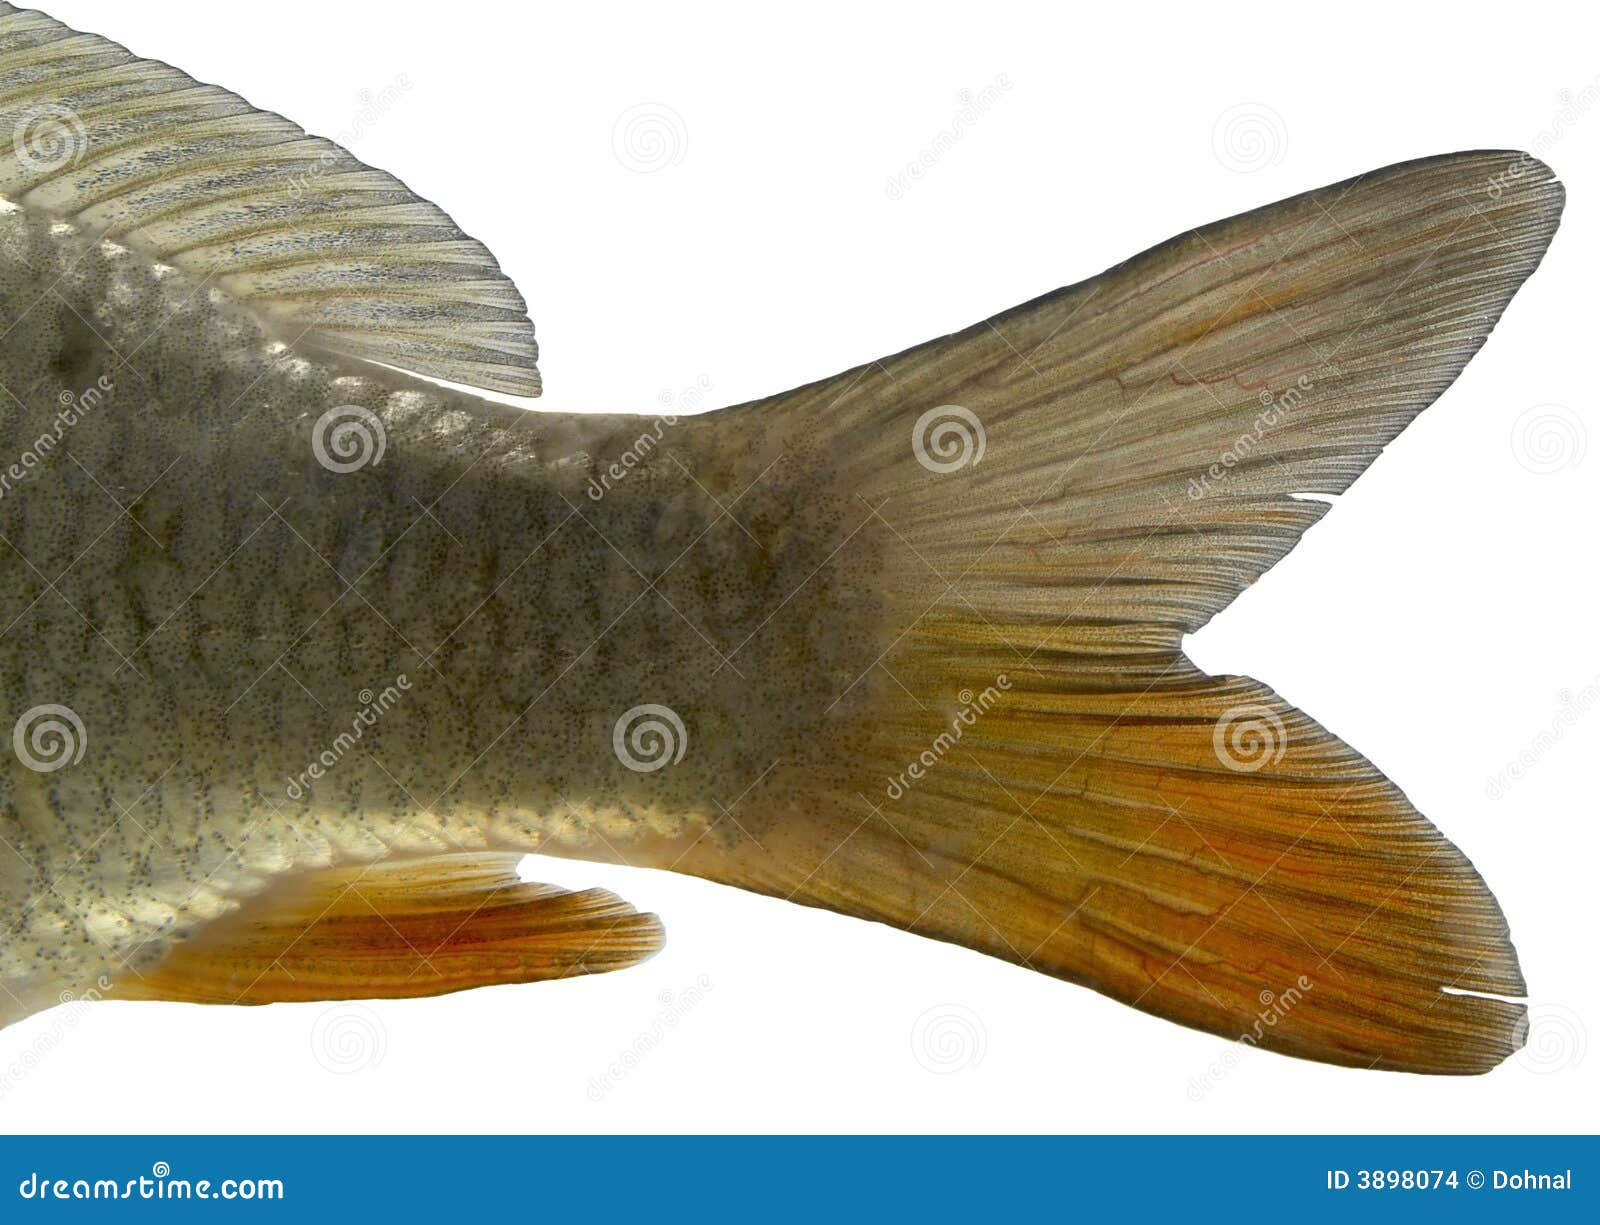 https://thumbs.dreamstime.com/z/fish-tail-isolated-3898074.jpg